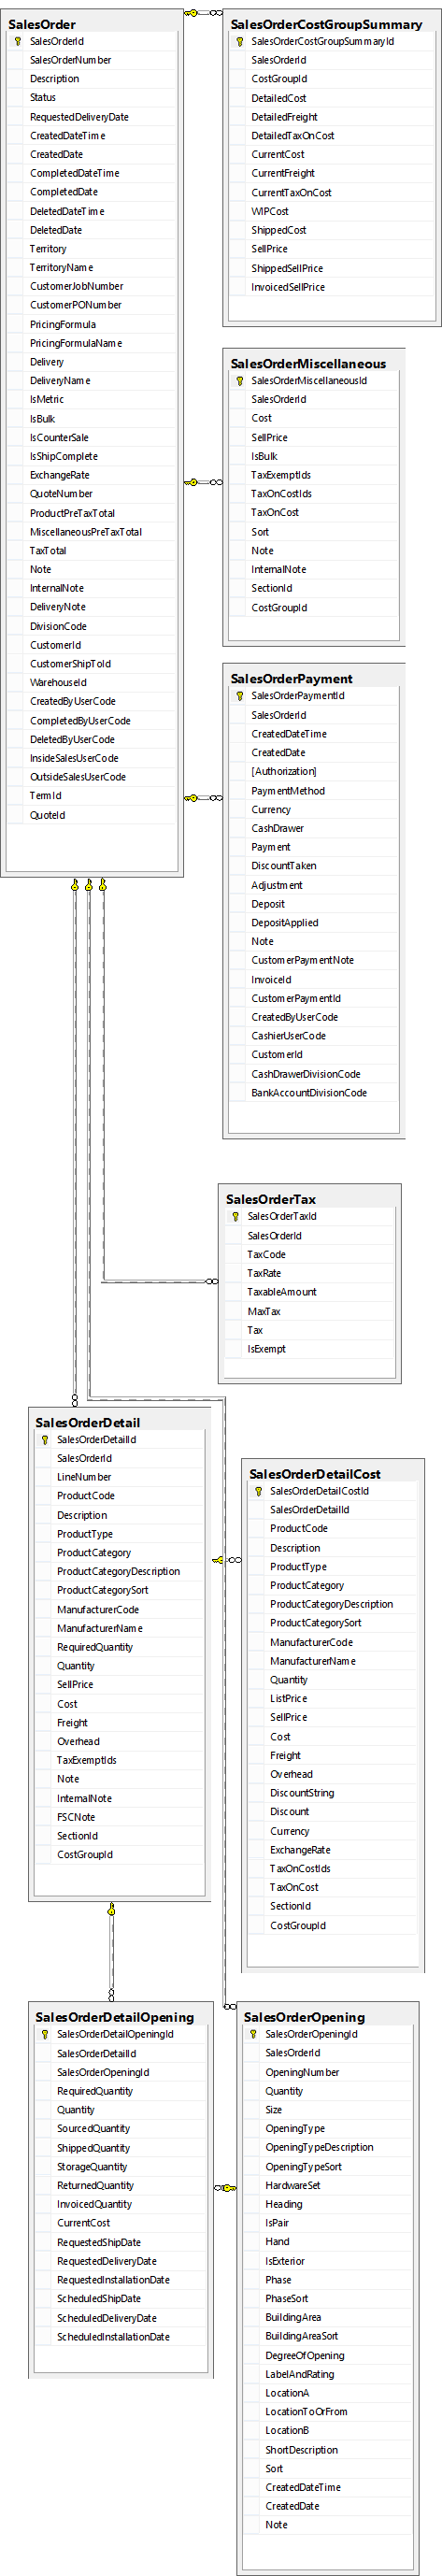 Sales Order Database Table Connections.